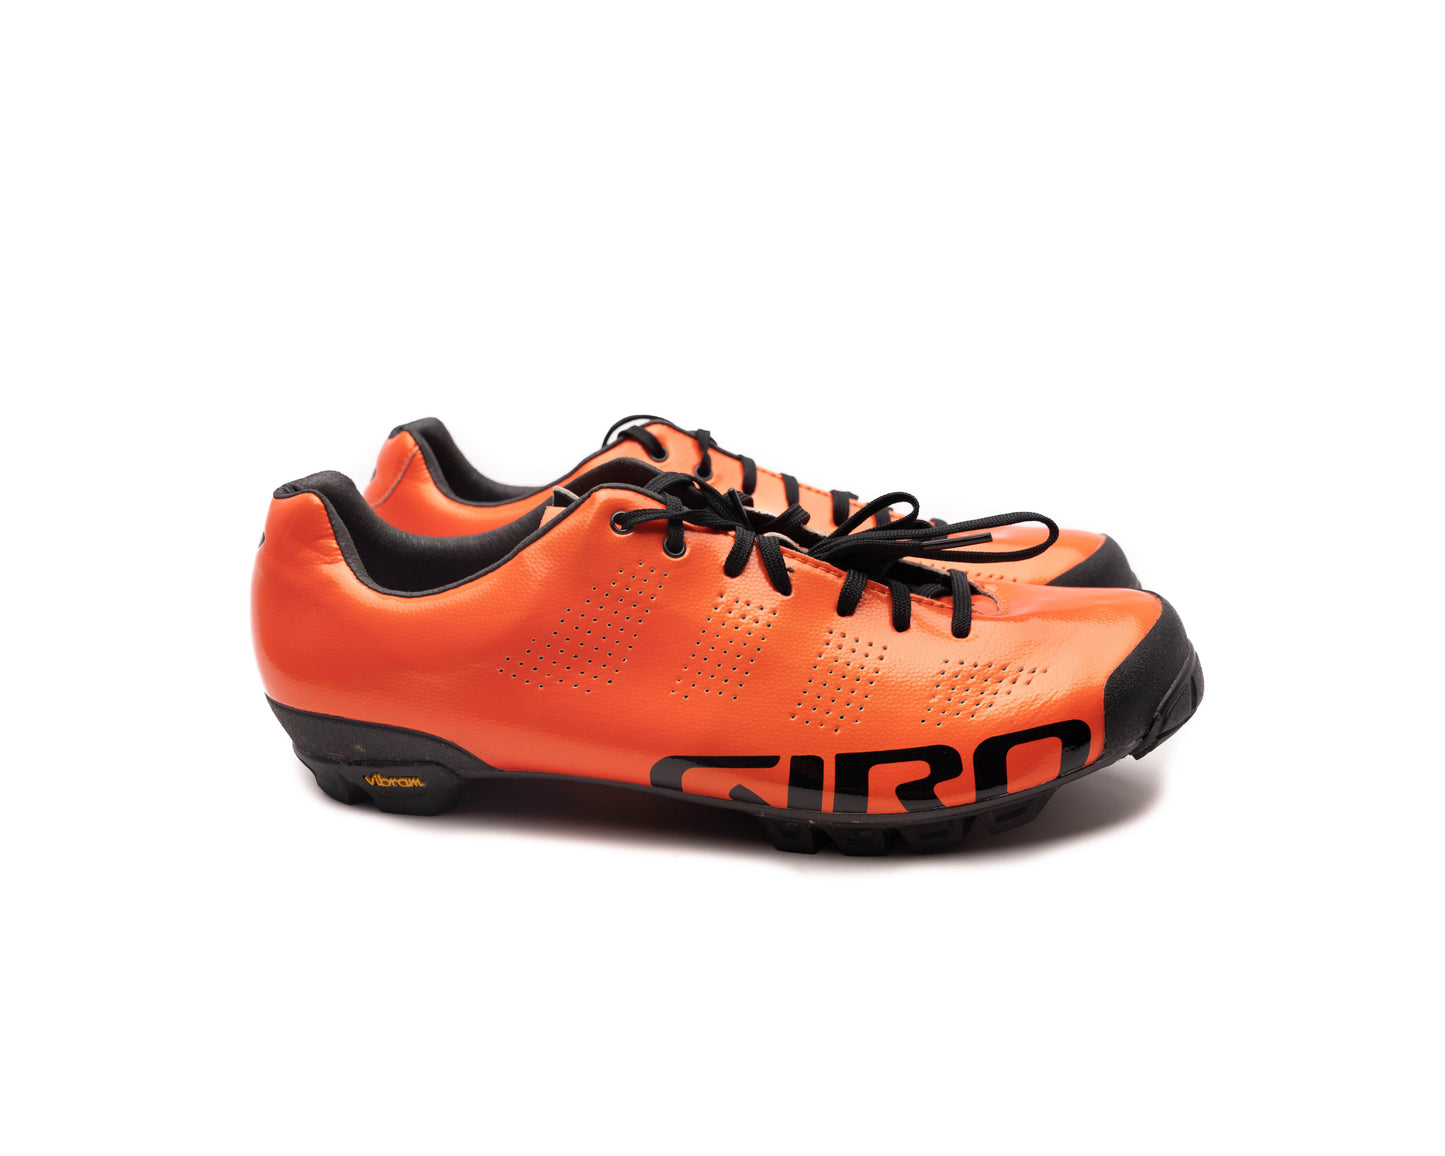 Giro Empire VR90 Shoe Anod Glow Blk/Red 45.5 - USED